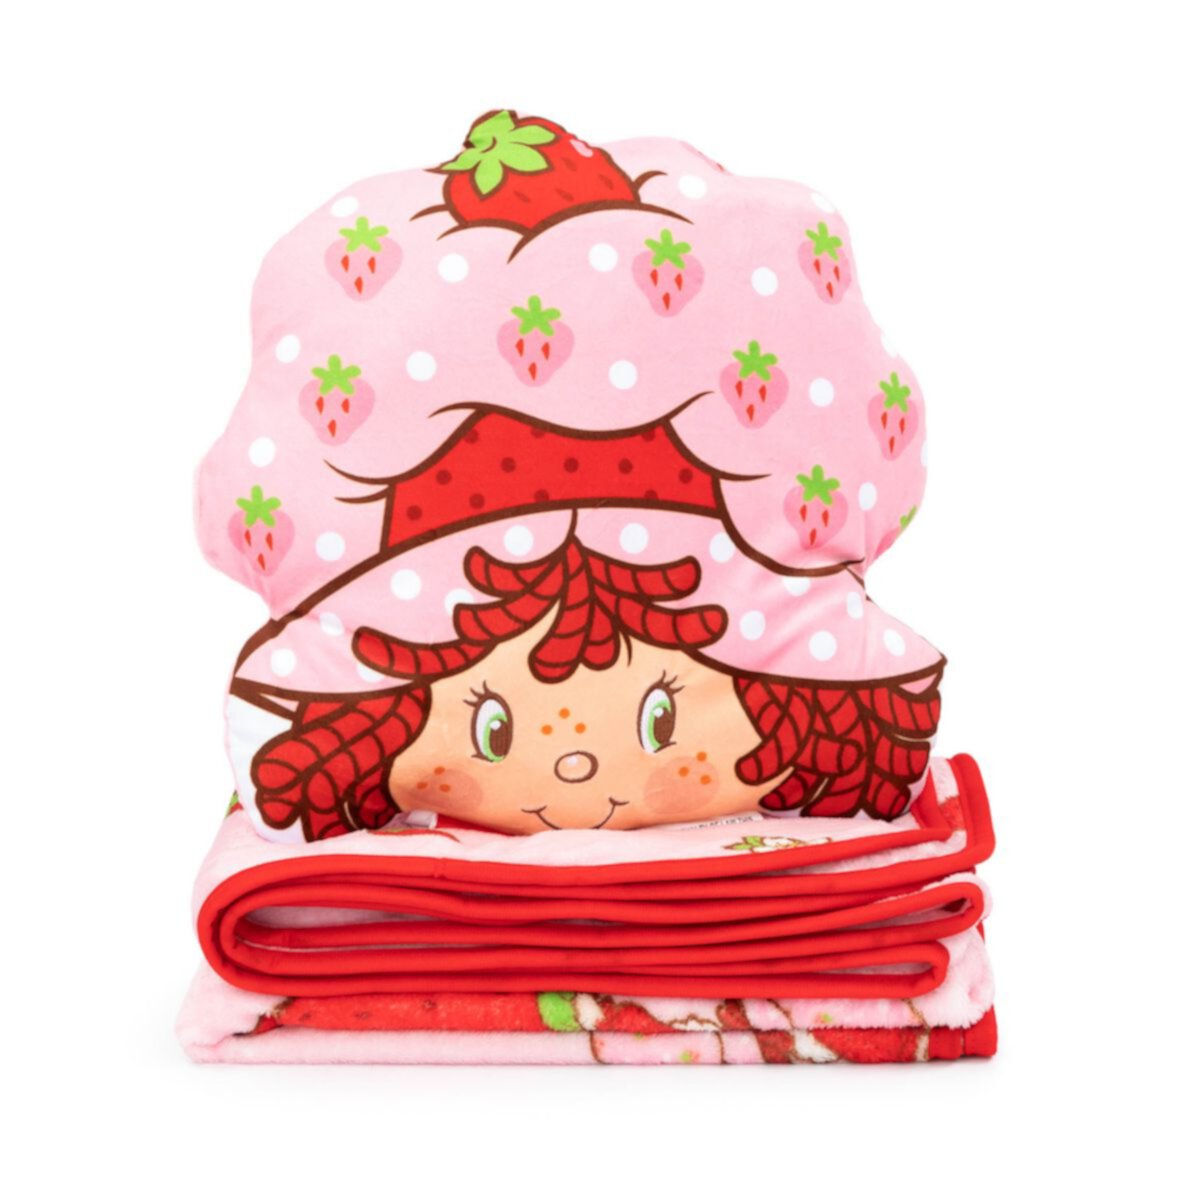 Strawberry Shortcake Strawberries Galore Throw & Pillow Buddy Set Licensed Character